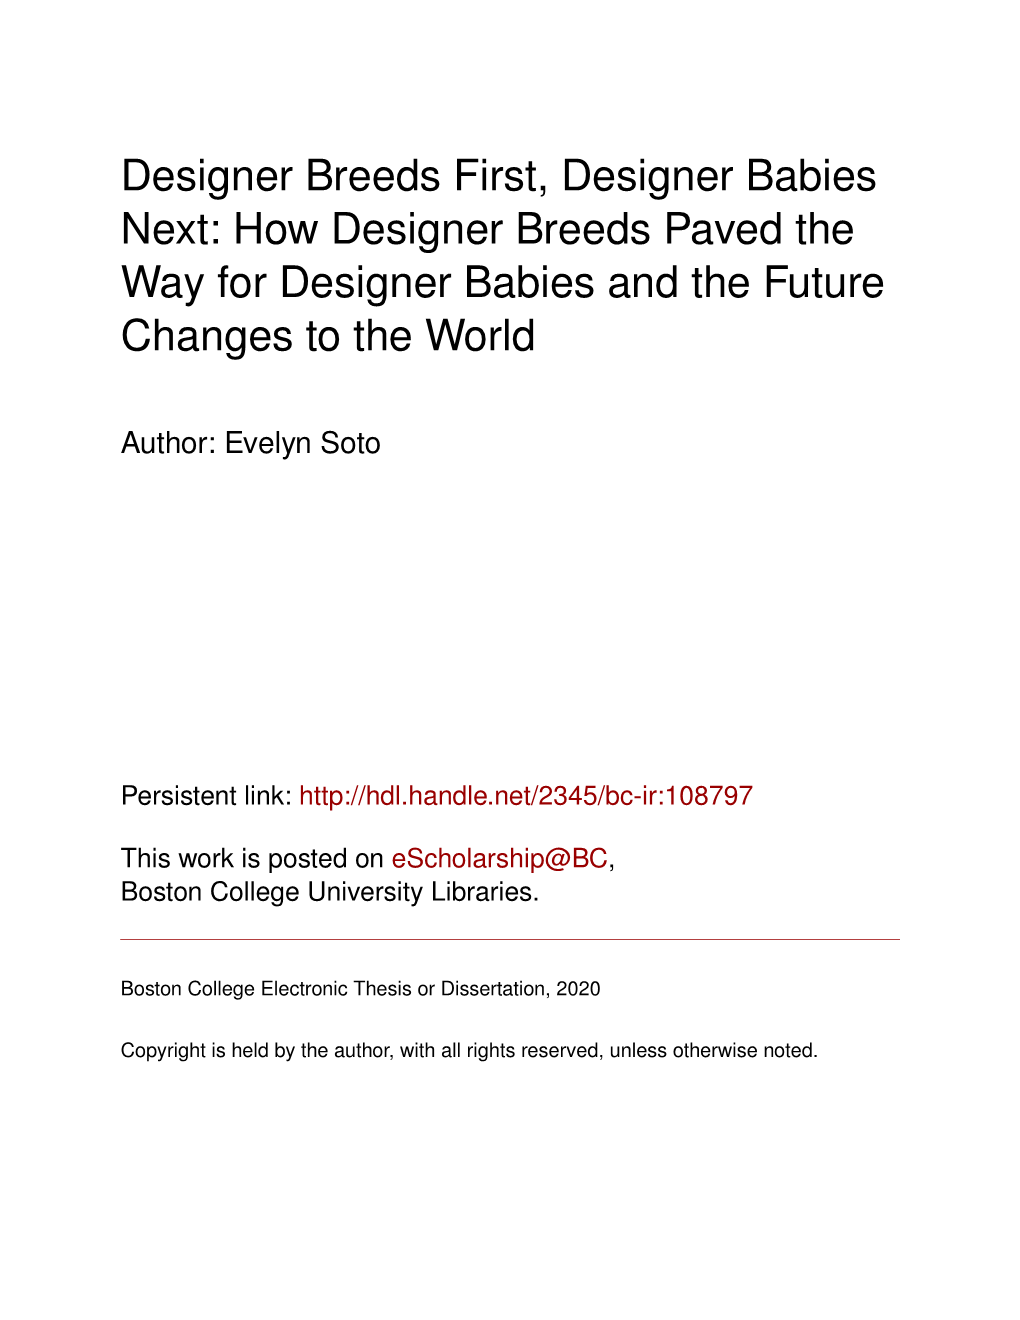 Designer Breeds First, Designer Babies Next: How Designer Breeds Paved the Way for Designer Babies and the Future Changes to the World